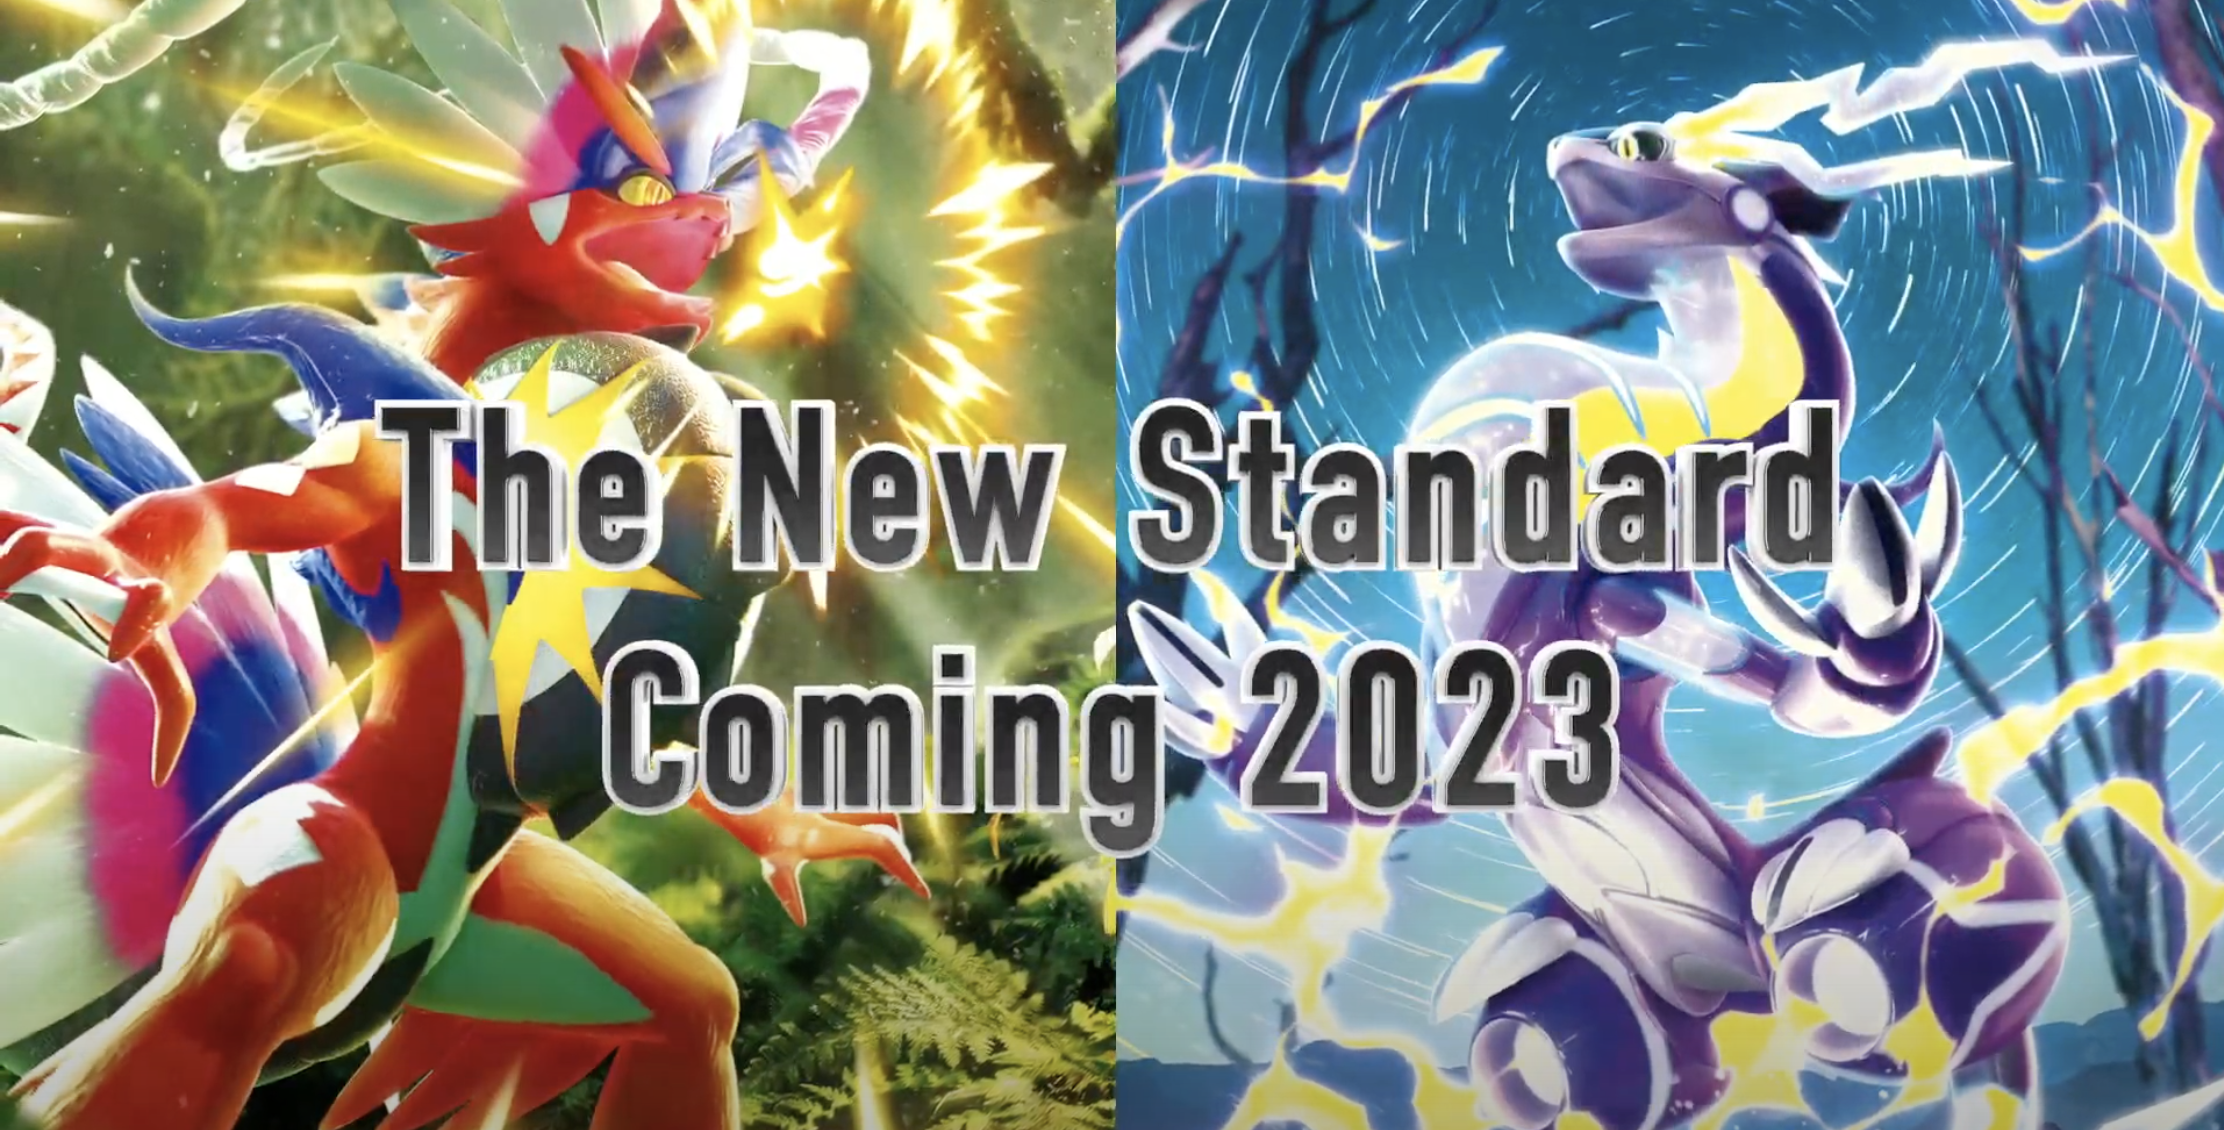 The New Standard Coming 2023